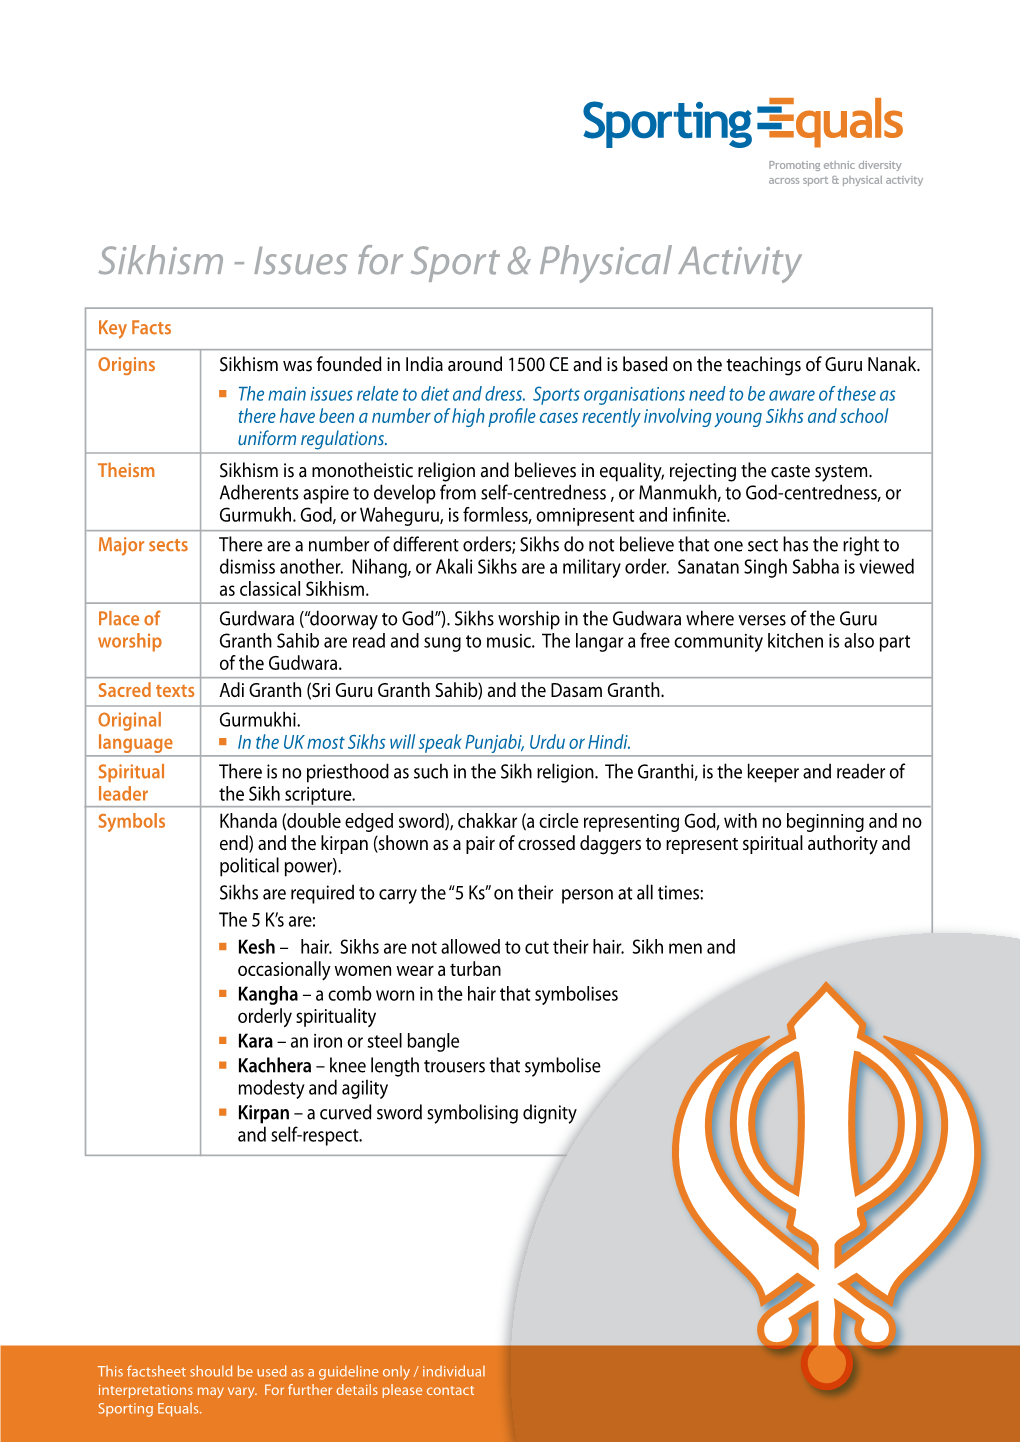 Sikhism - Issues for Sport & Physical Activity